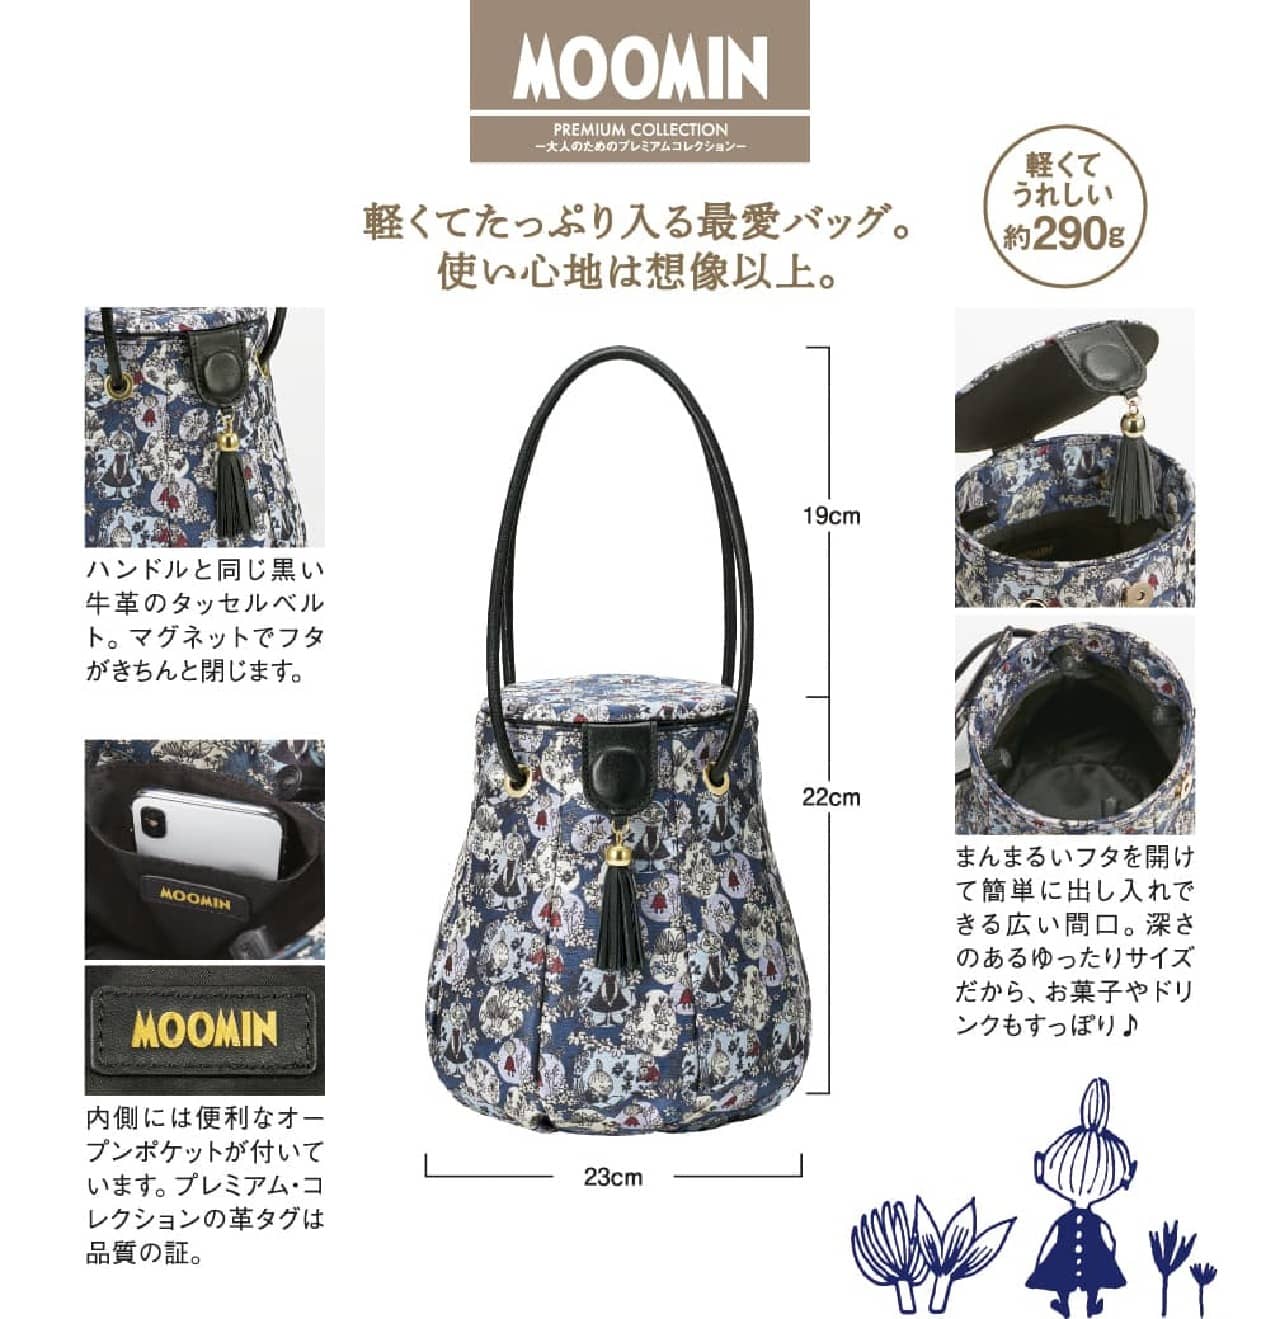 Moomin “Mimura-neesan & Little My plump and cute lantern-shaped bag” is now available from Imperial Enterprises Image 3